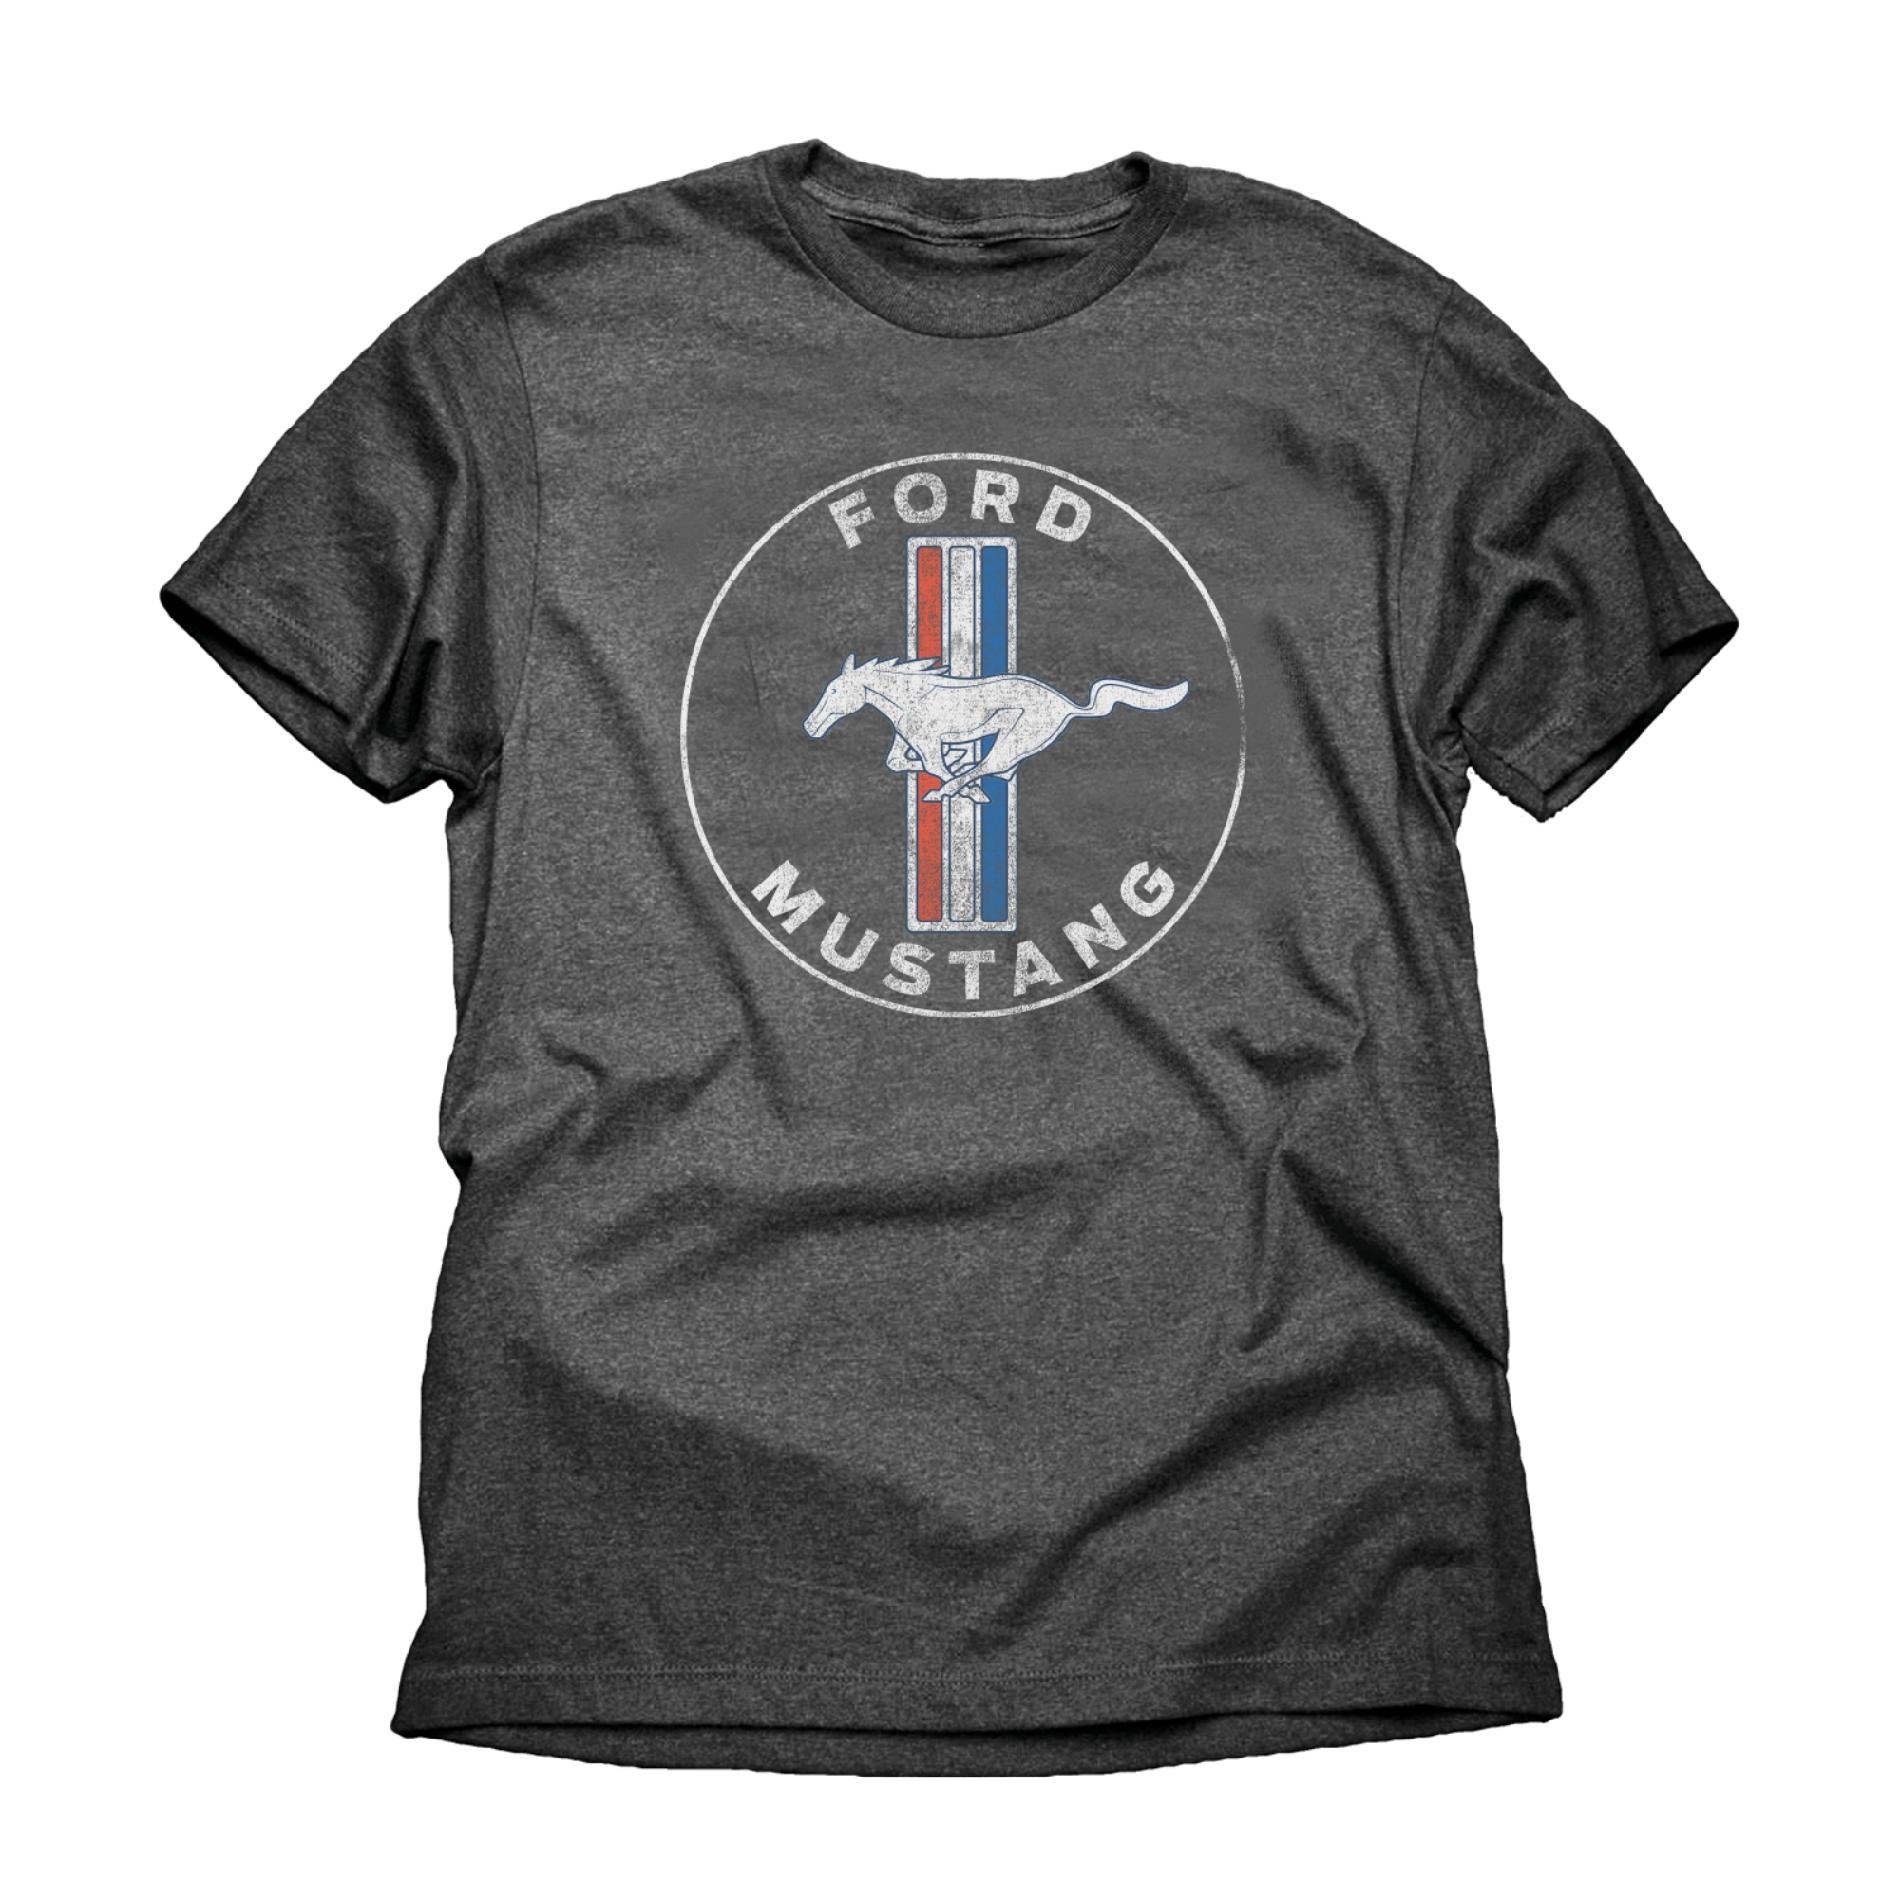 Ford Motor Company Men's Graphic T-Shirt - Ford Mustang